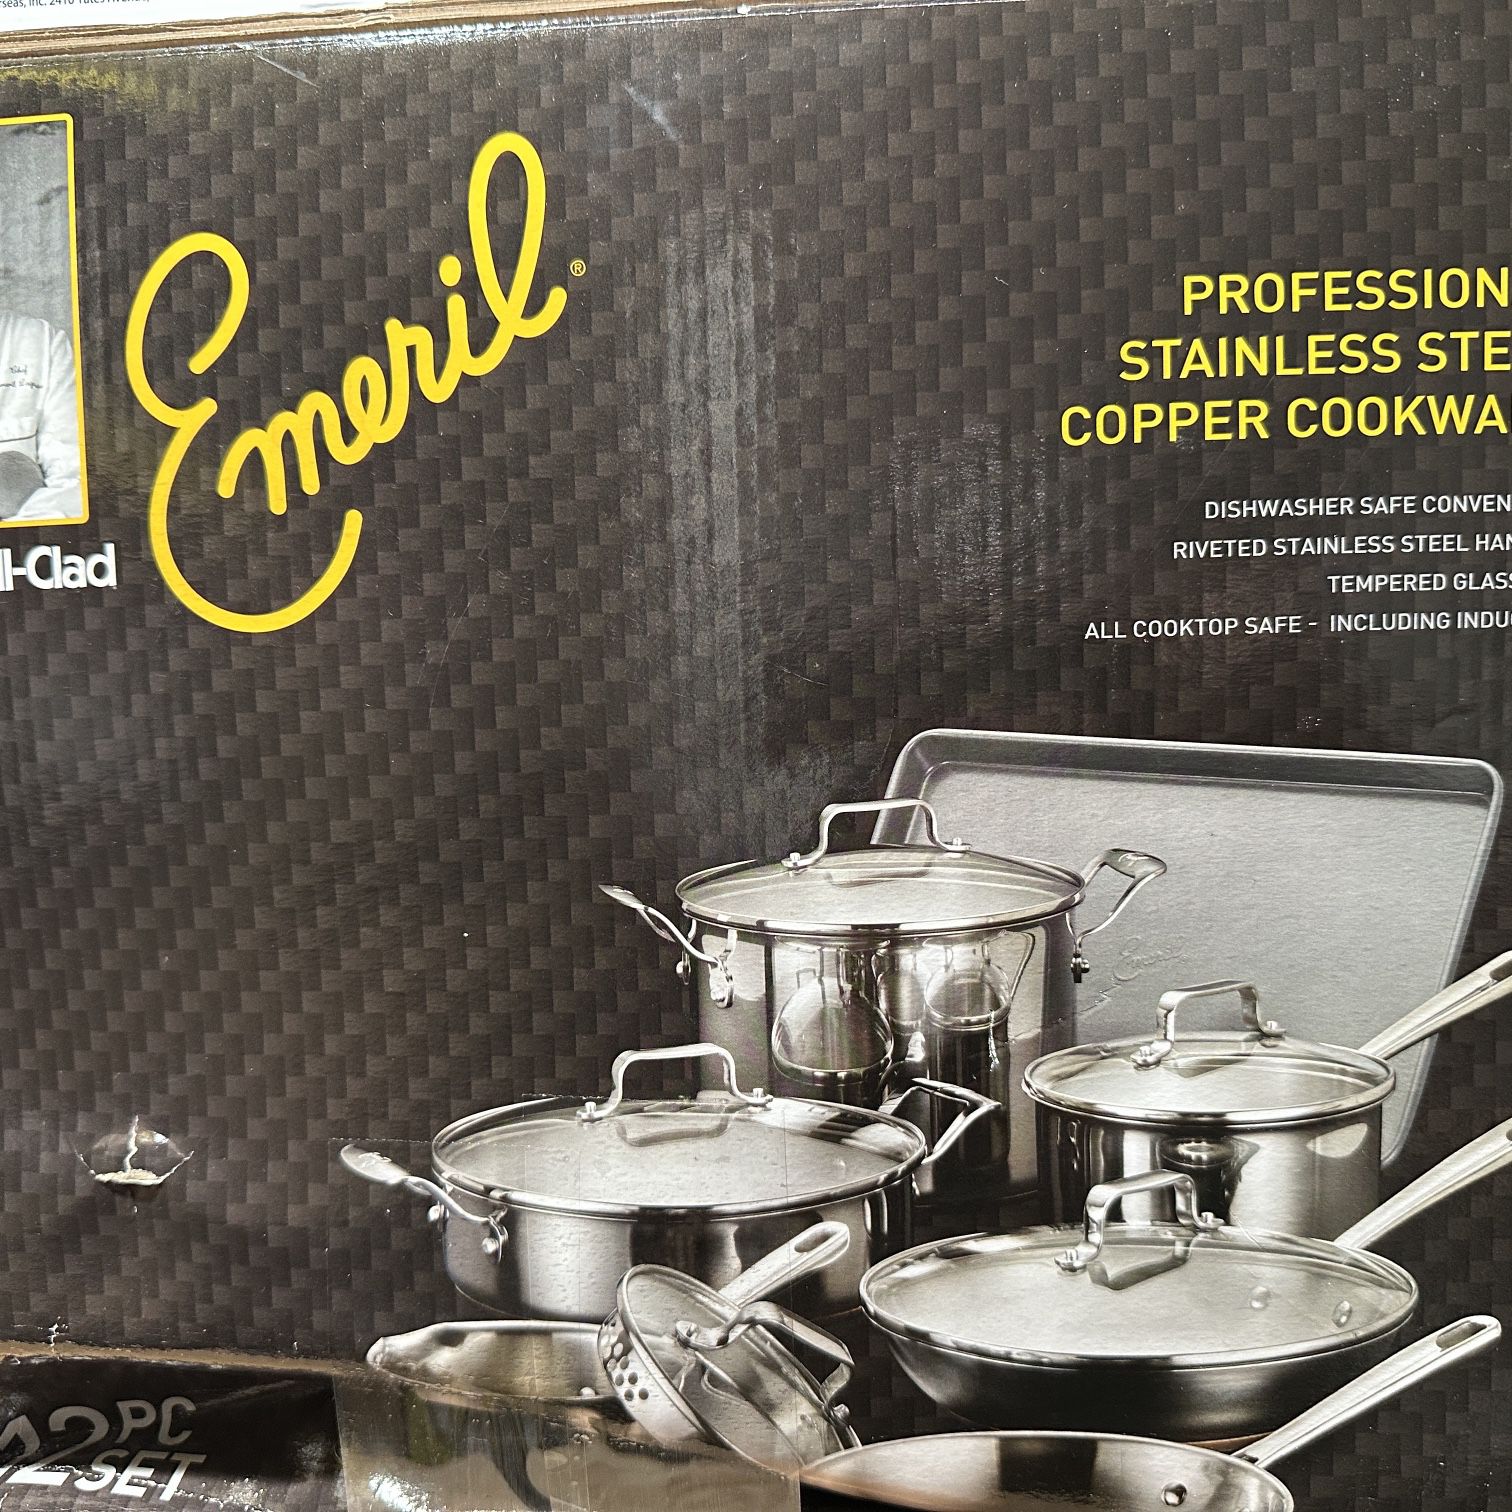 Emeril 12-Piece Stainless Steel Cookware Set 